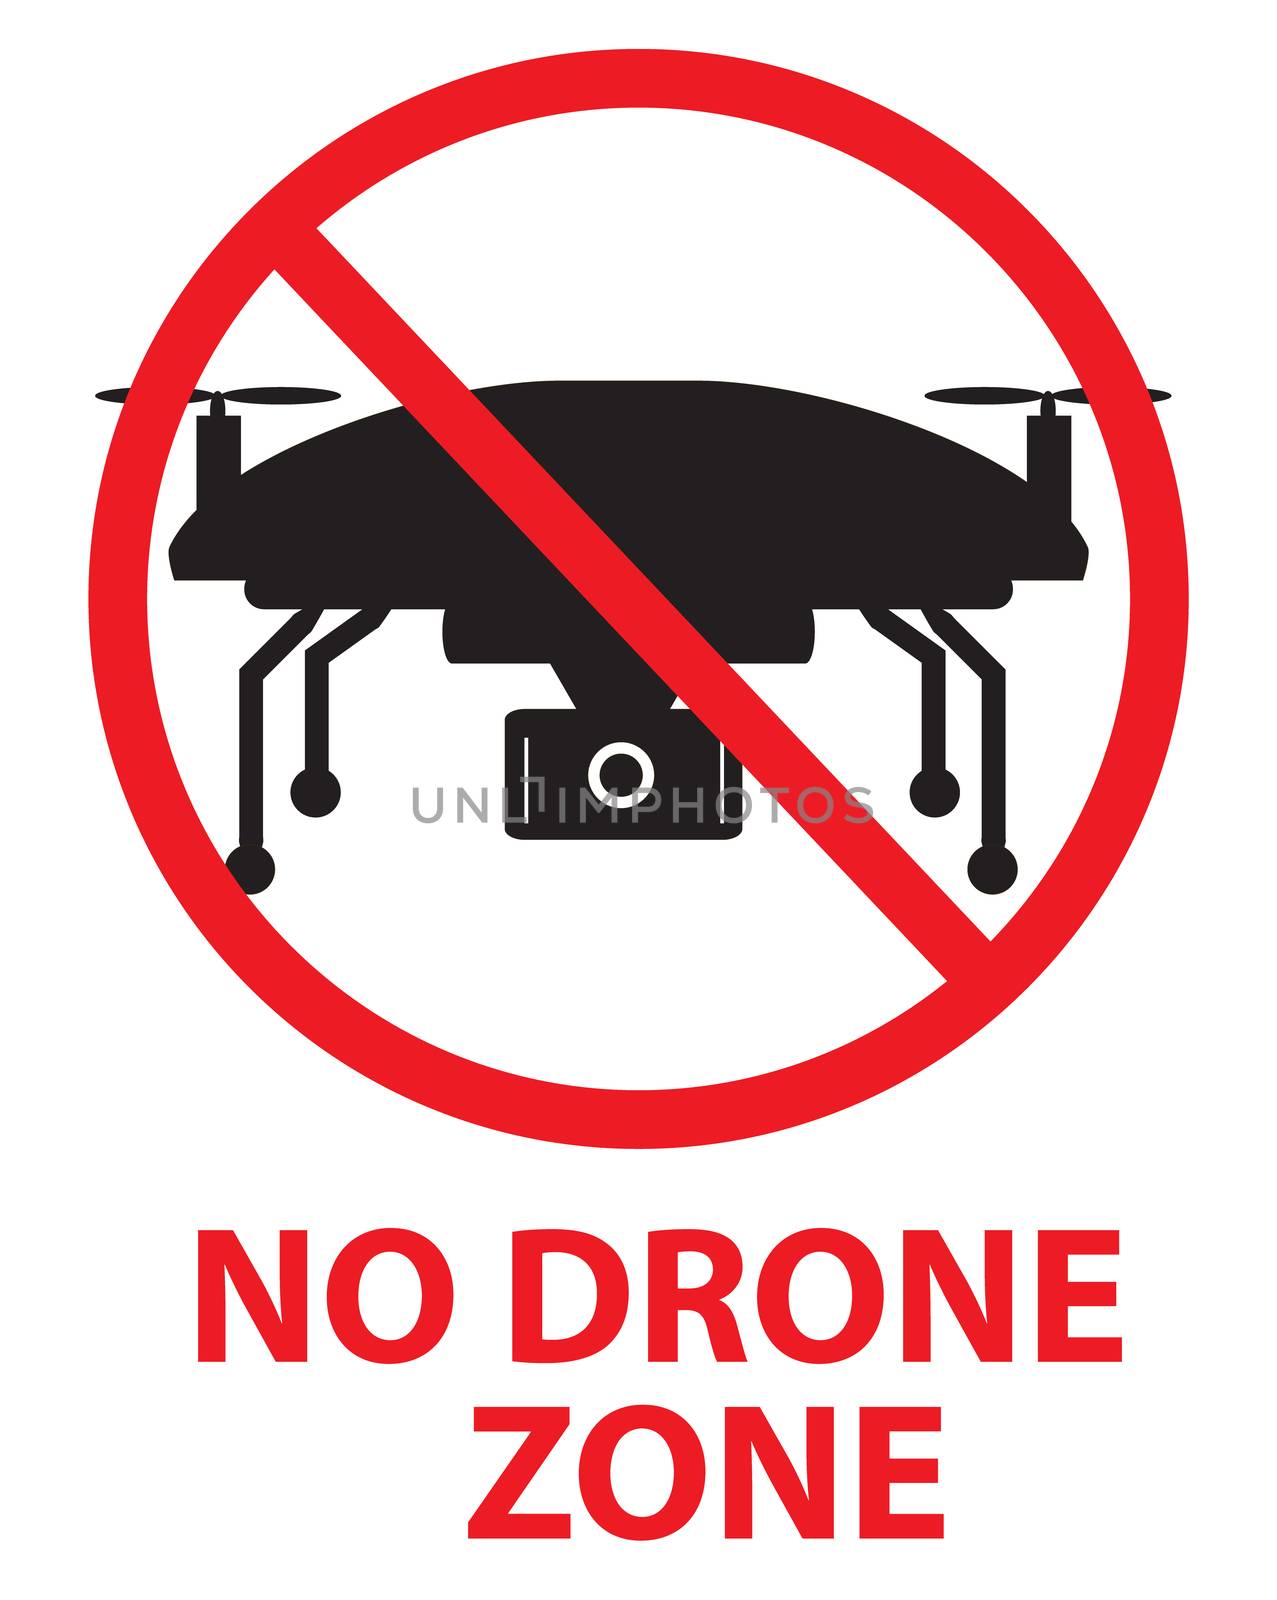 drone flights prohibited in thai area. no drone zone sign. no fl by suthee